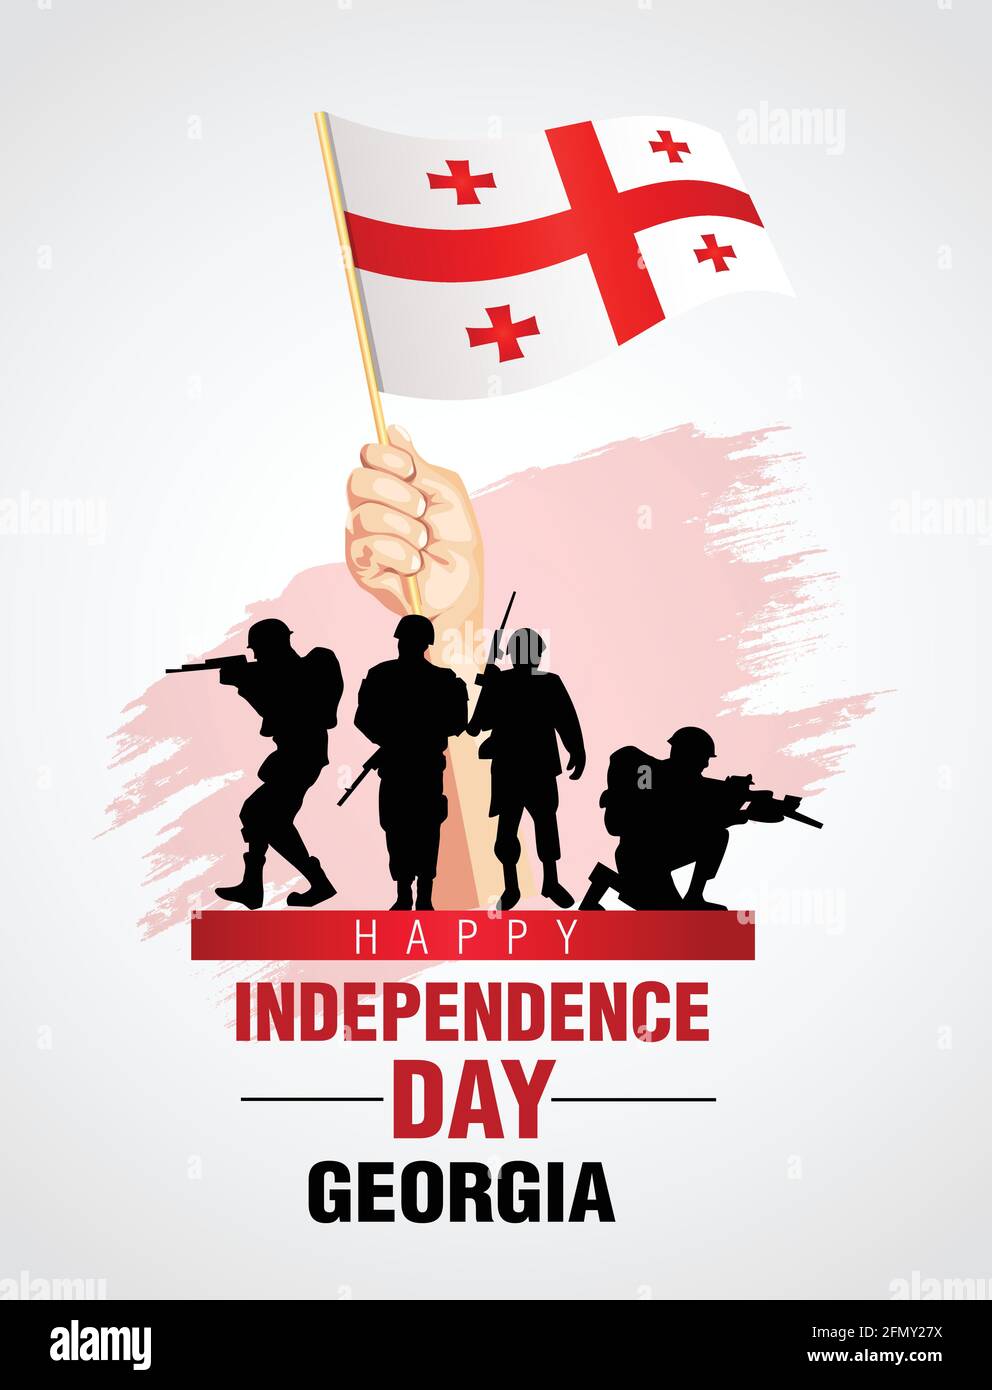 happy independence day Georgia. Georgian soldier with gun vector illustration design Stock Vector